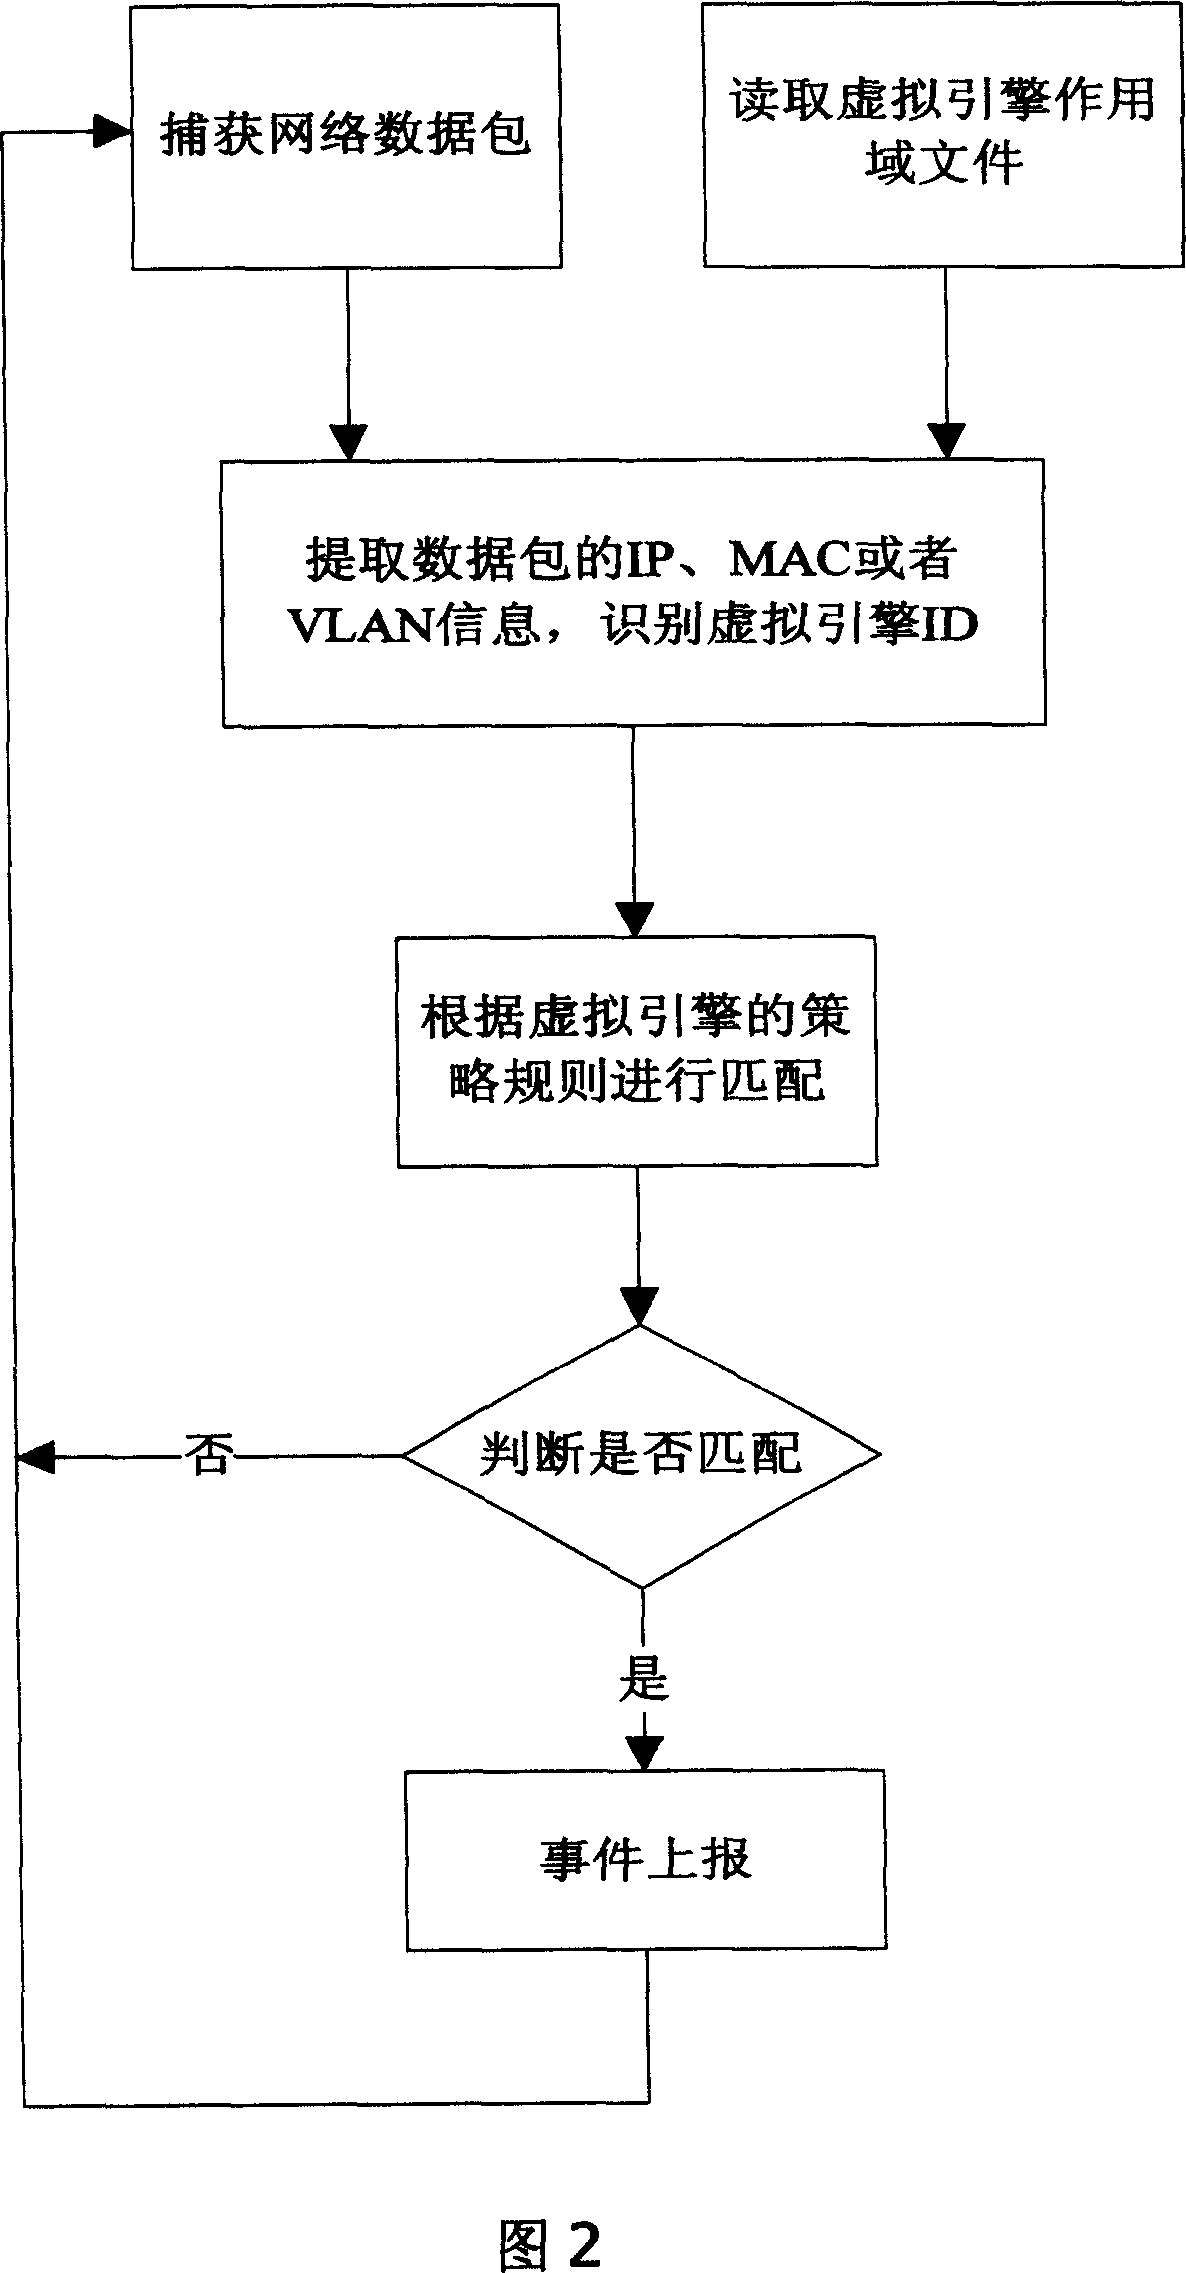 Method for implementing virtual engine technique for intrusion detection